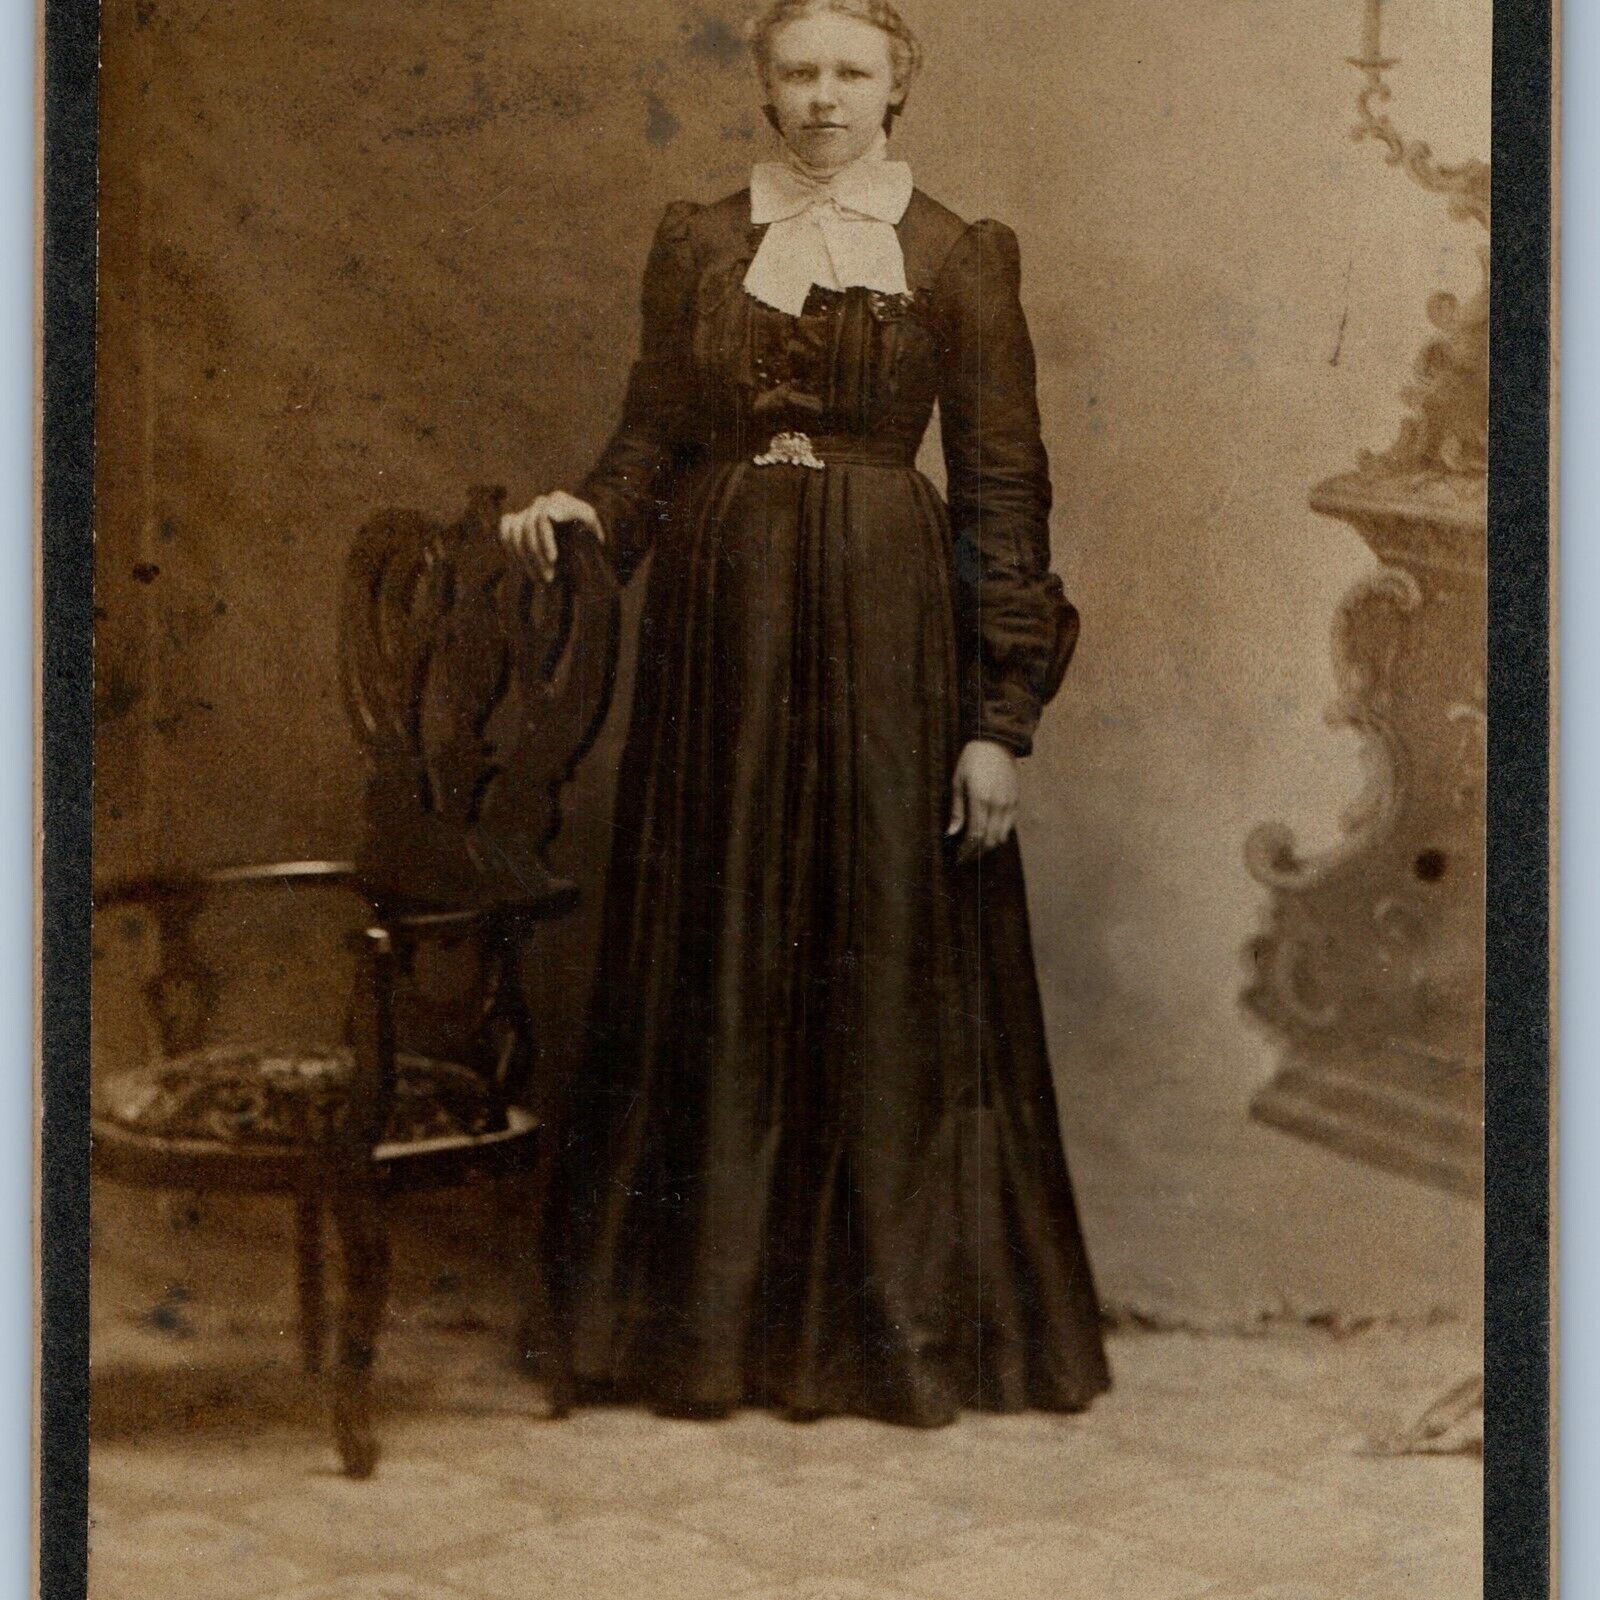 c1900s Womanly Girly Lady Cabinet Card Photo A Black Dress Big Bow Metal Belt B1